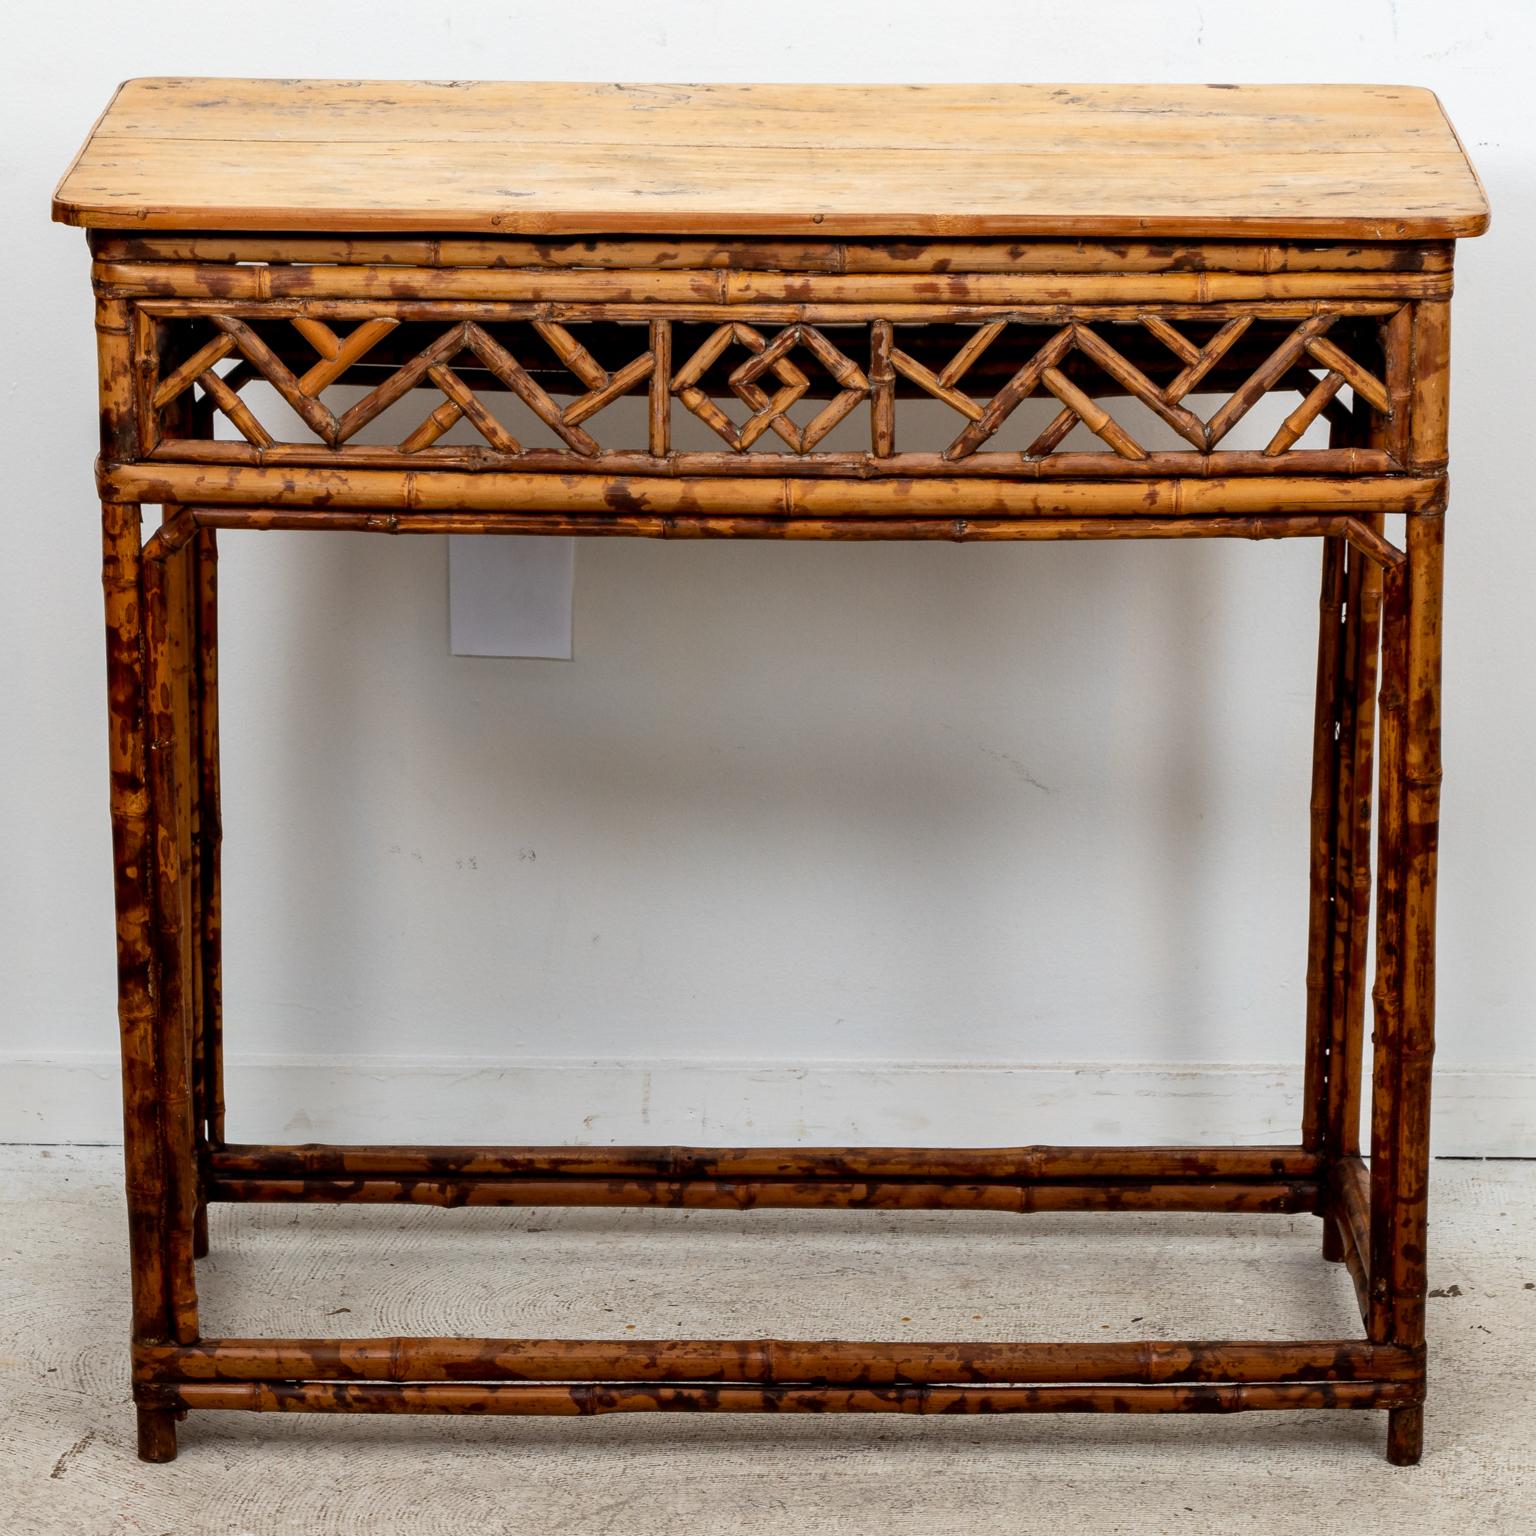 Circa 1960s Rattan console in the Mid-Century Modern style with open geometric fretwork panels on the table skirt and bottom stretchers. Please note of wear consistent with age including finish loss and chips to the rattan.